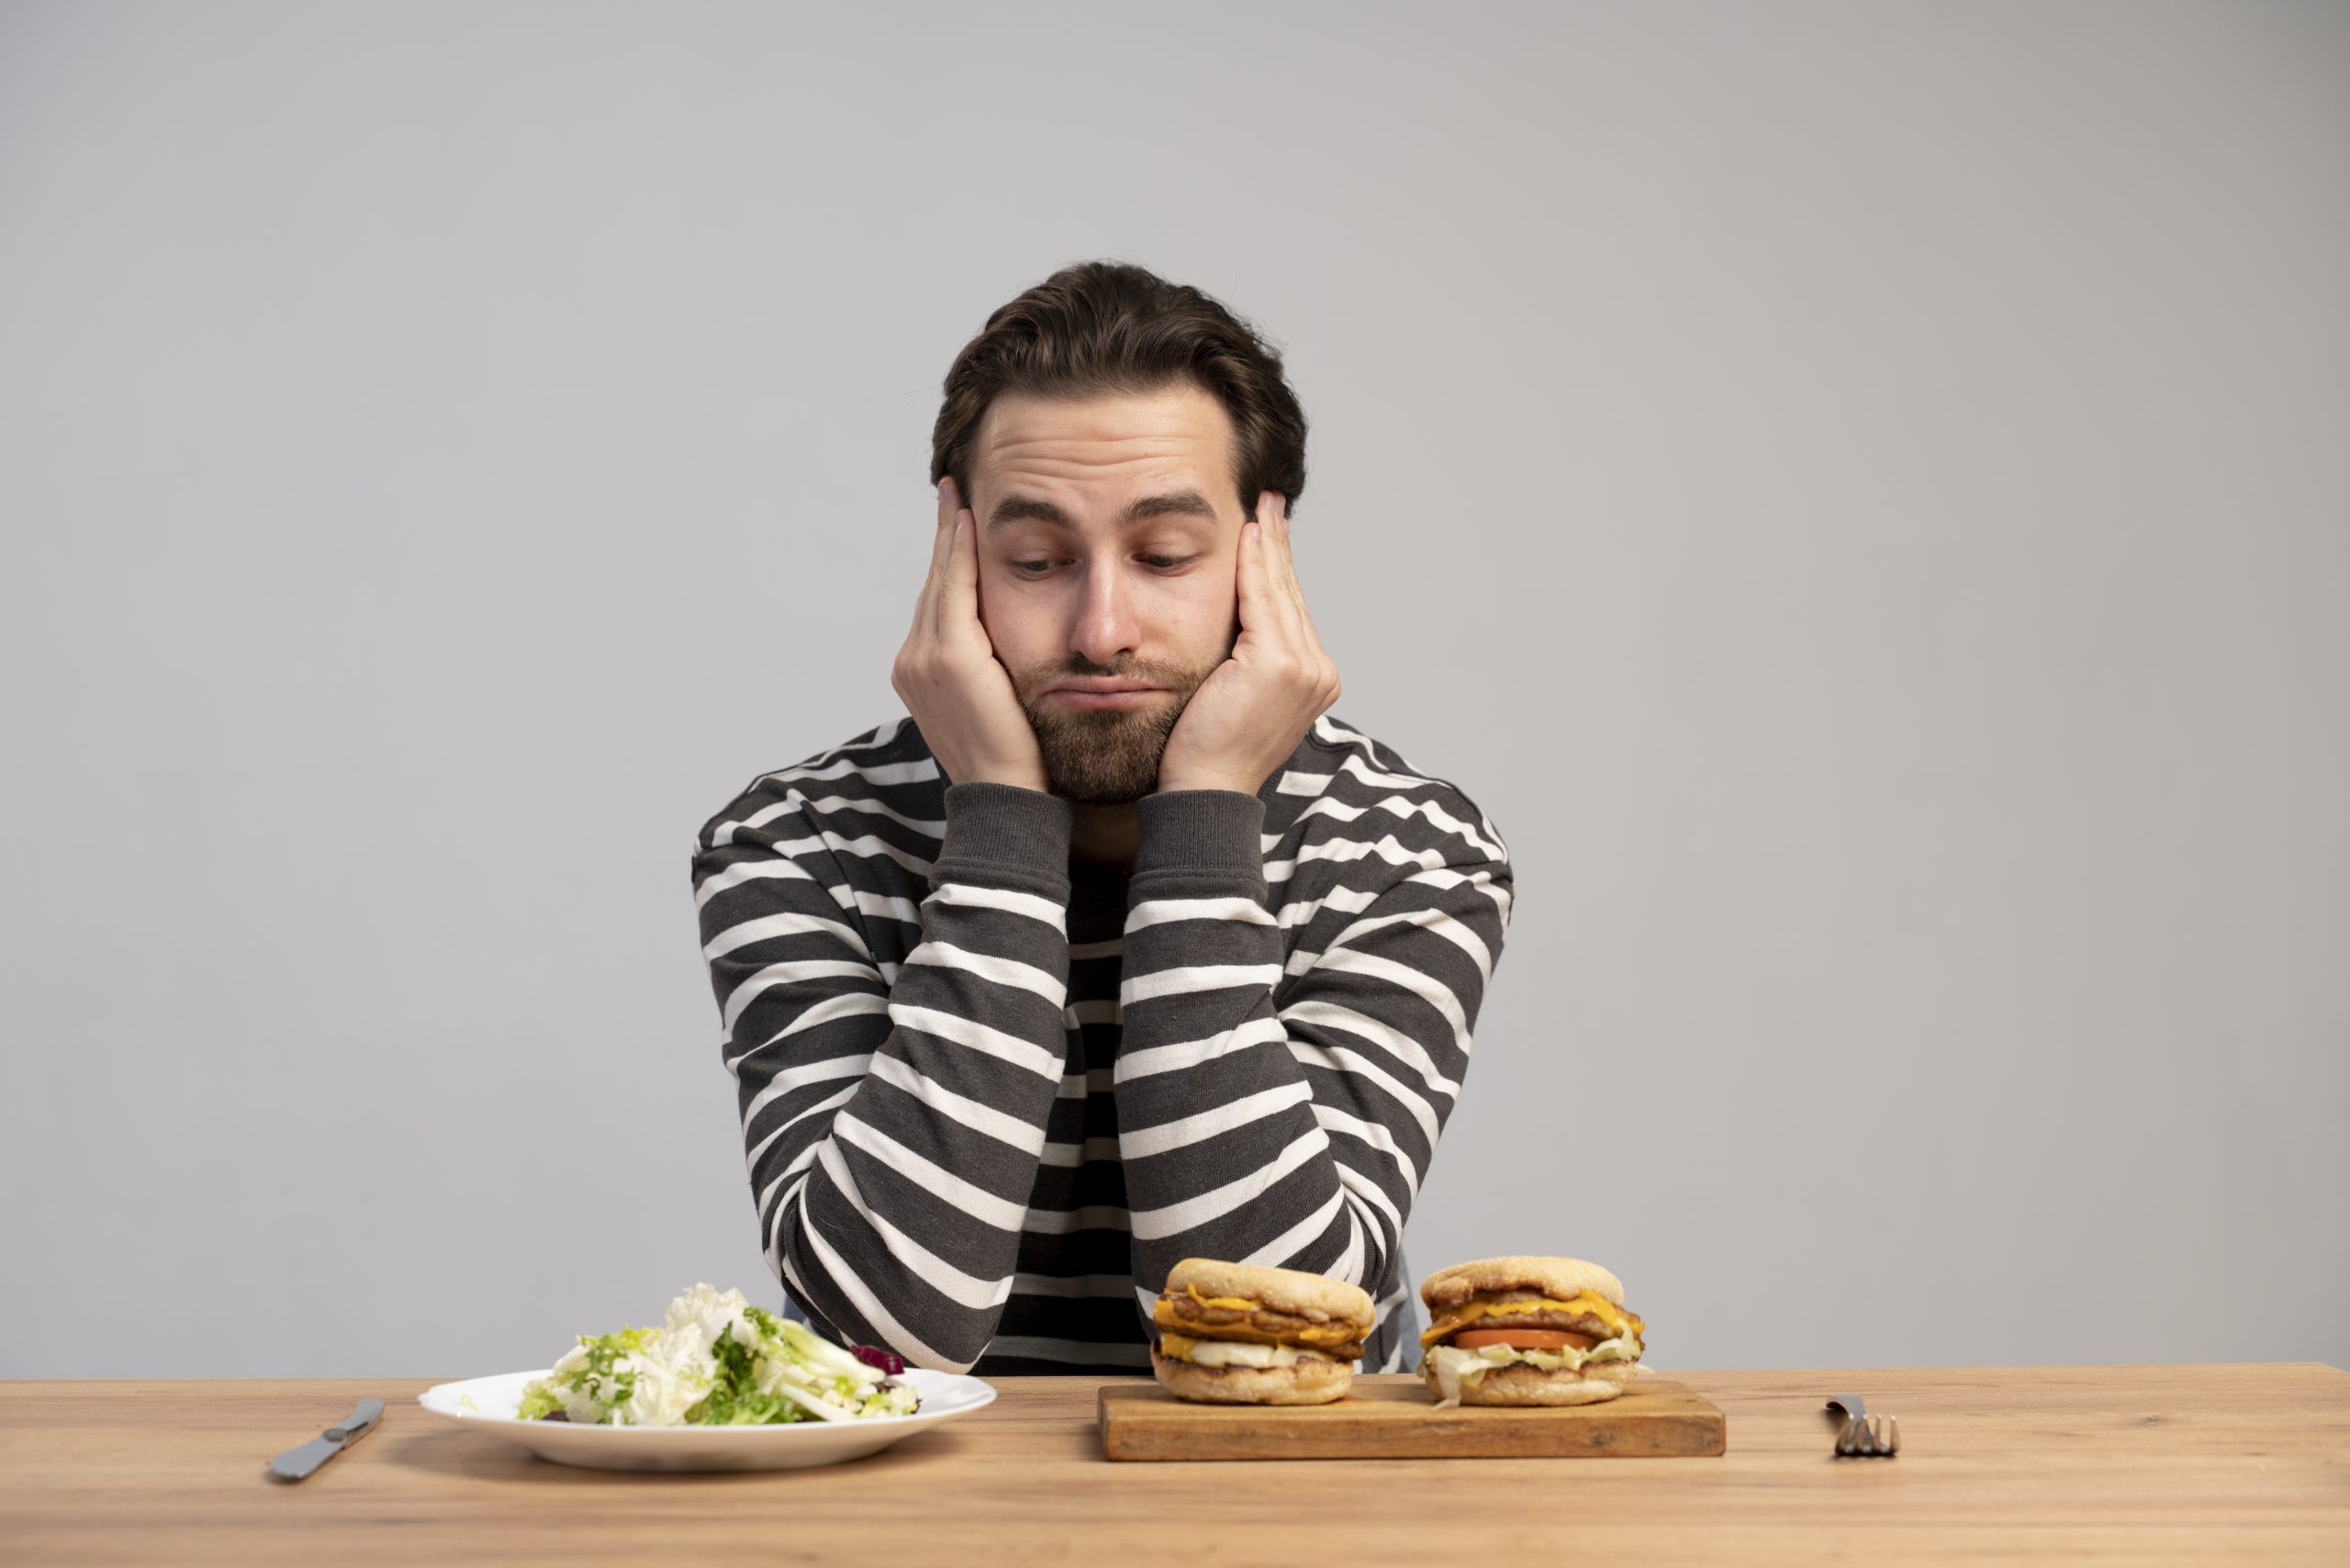 A person sitting at a table, struggling to decide between a plate of salad and a plate of burgers, indicates a common mental health issue.